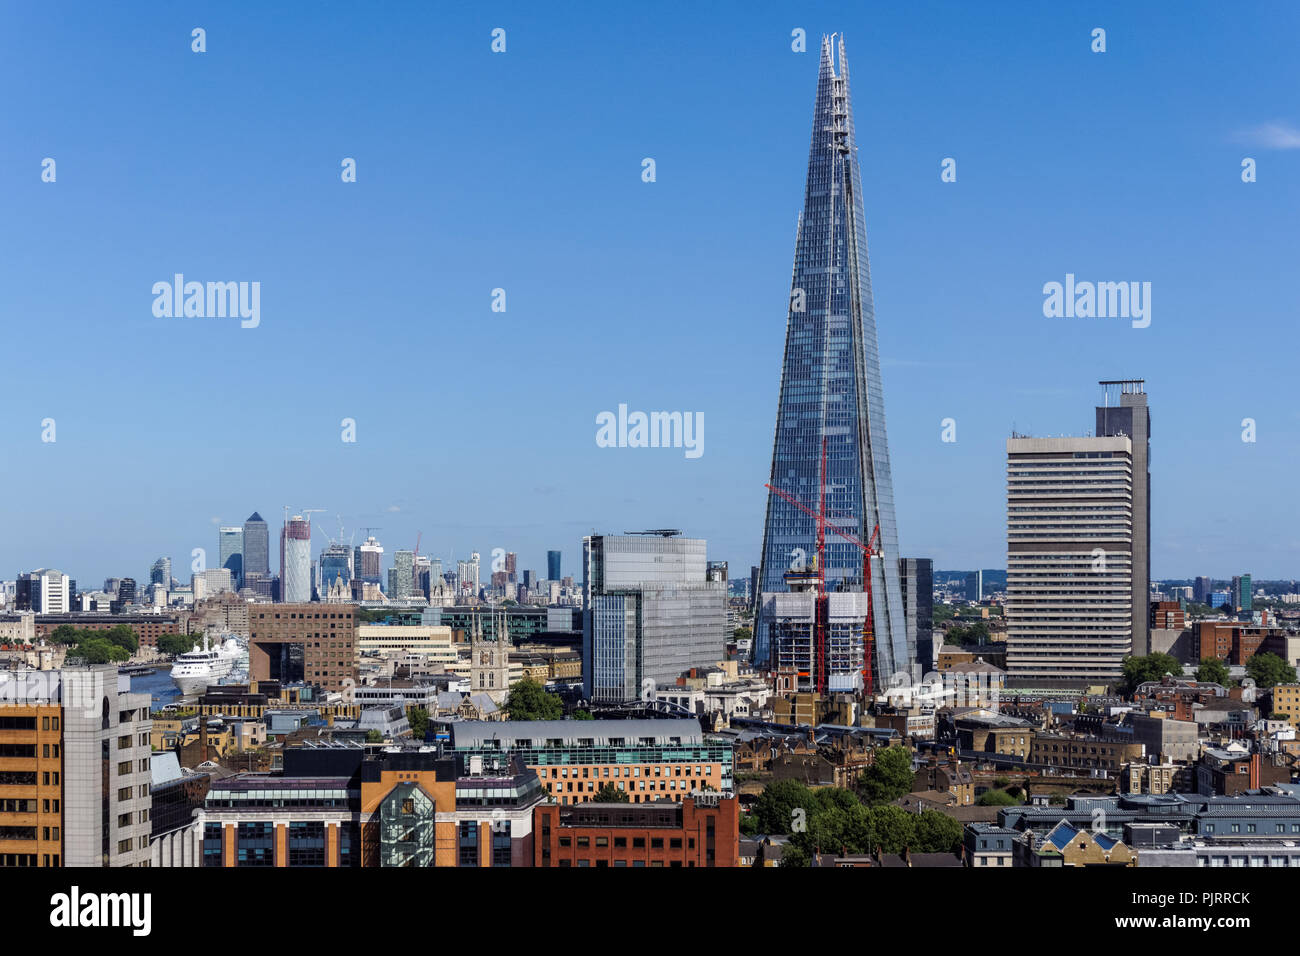 Panoramic view of London with the Shard skyscraper, England United Kingdom UK Stock Photo